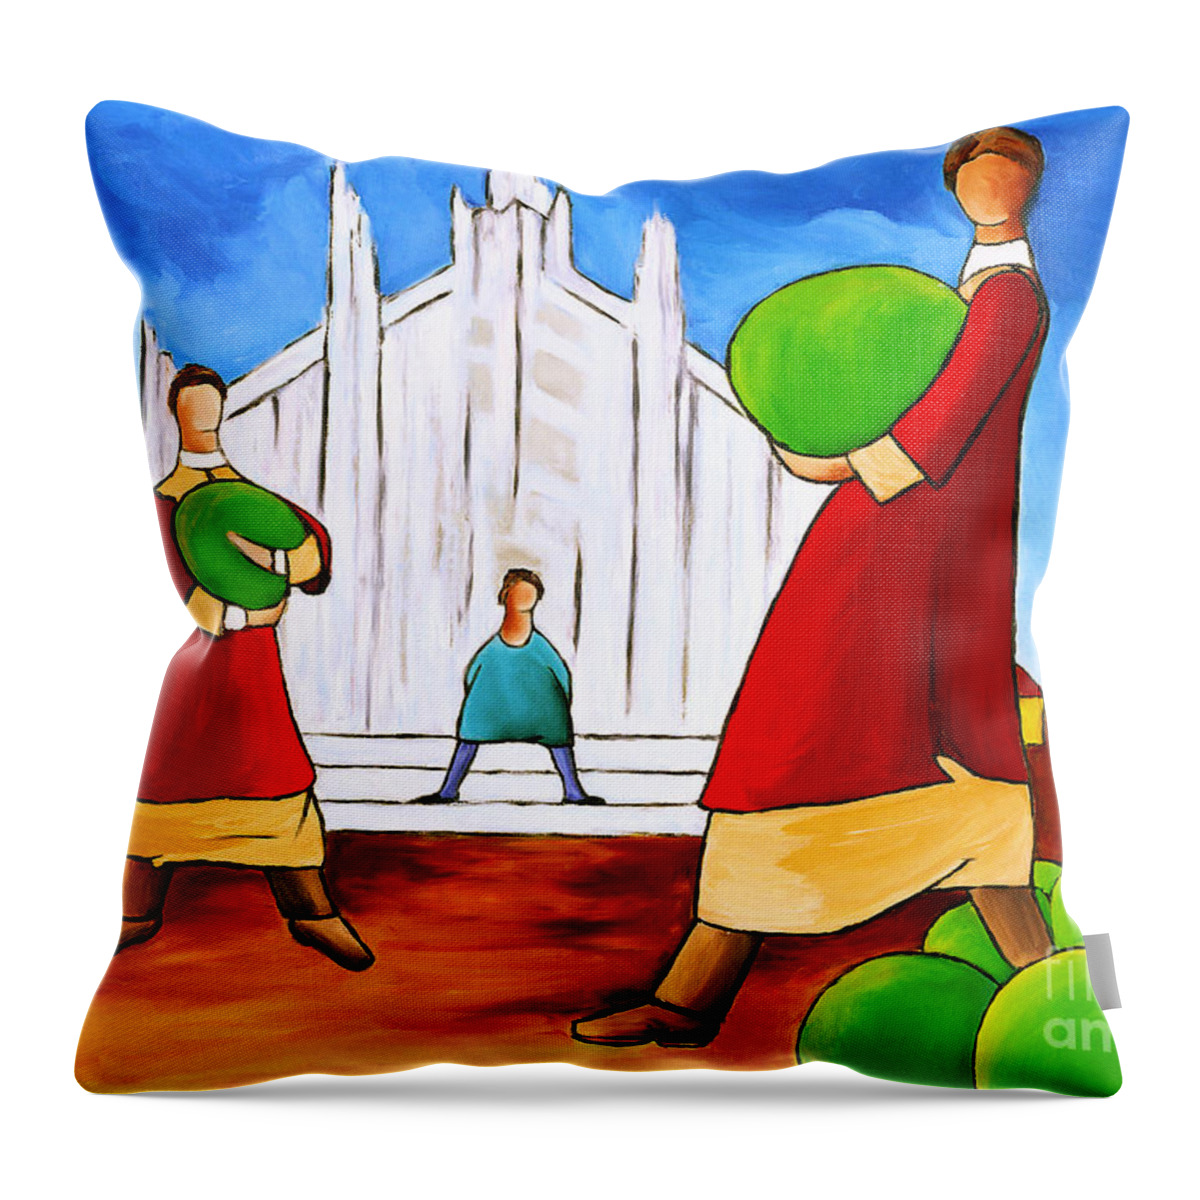 Mediterranean Cathedral Throw Pillow featuring the painting Cathedral And Melons by William Cain